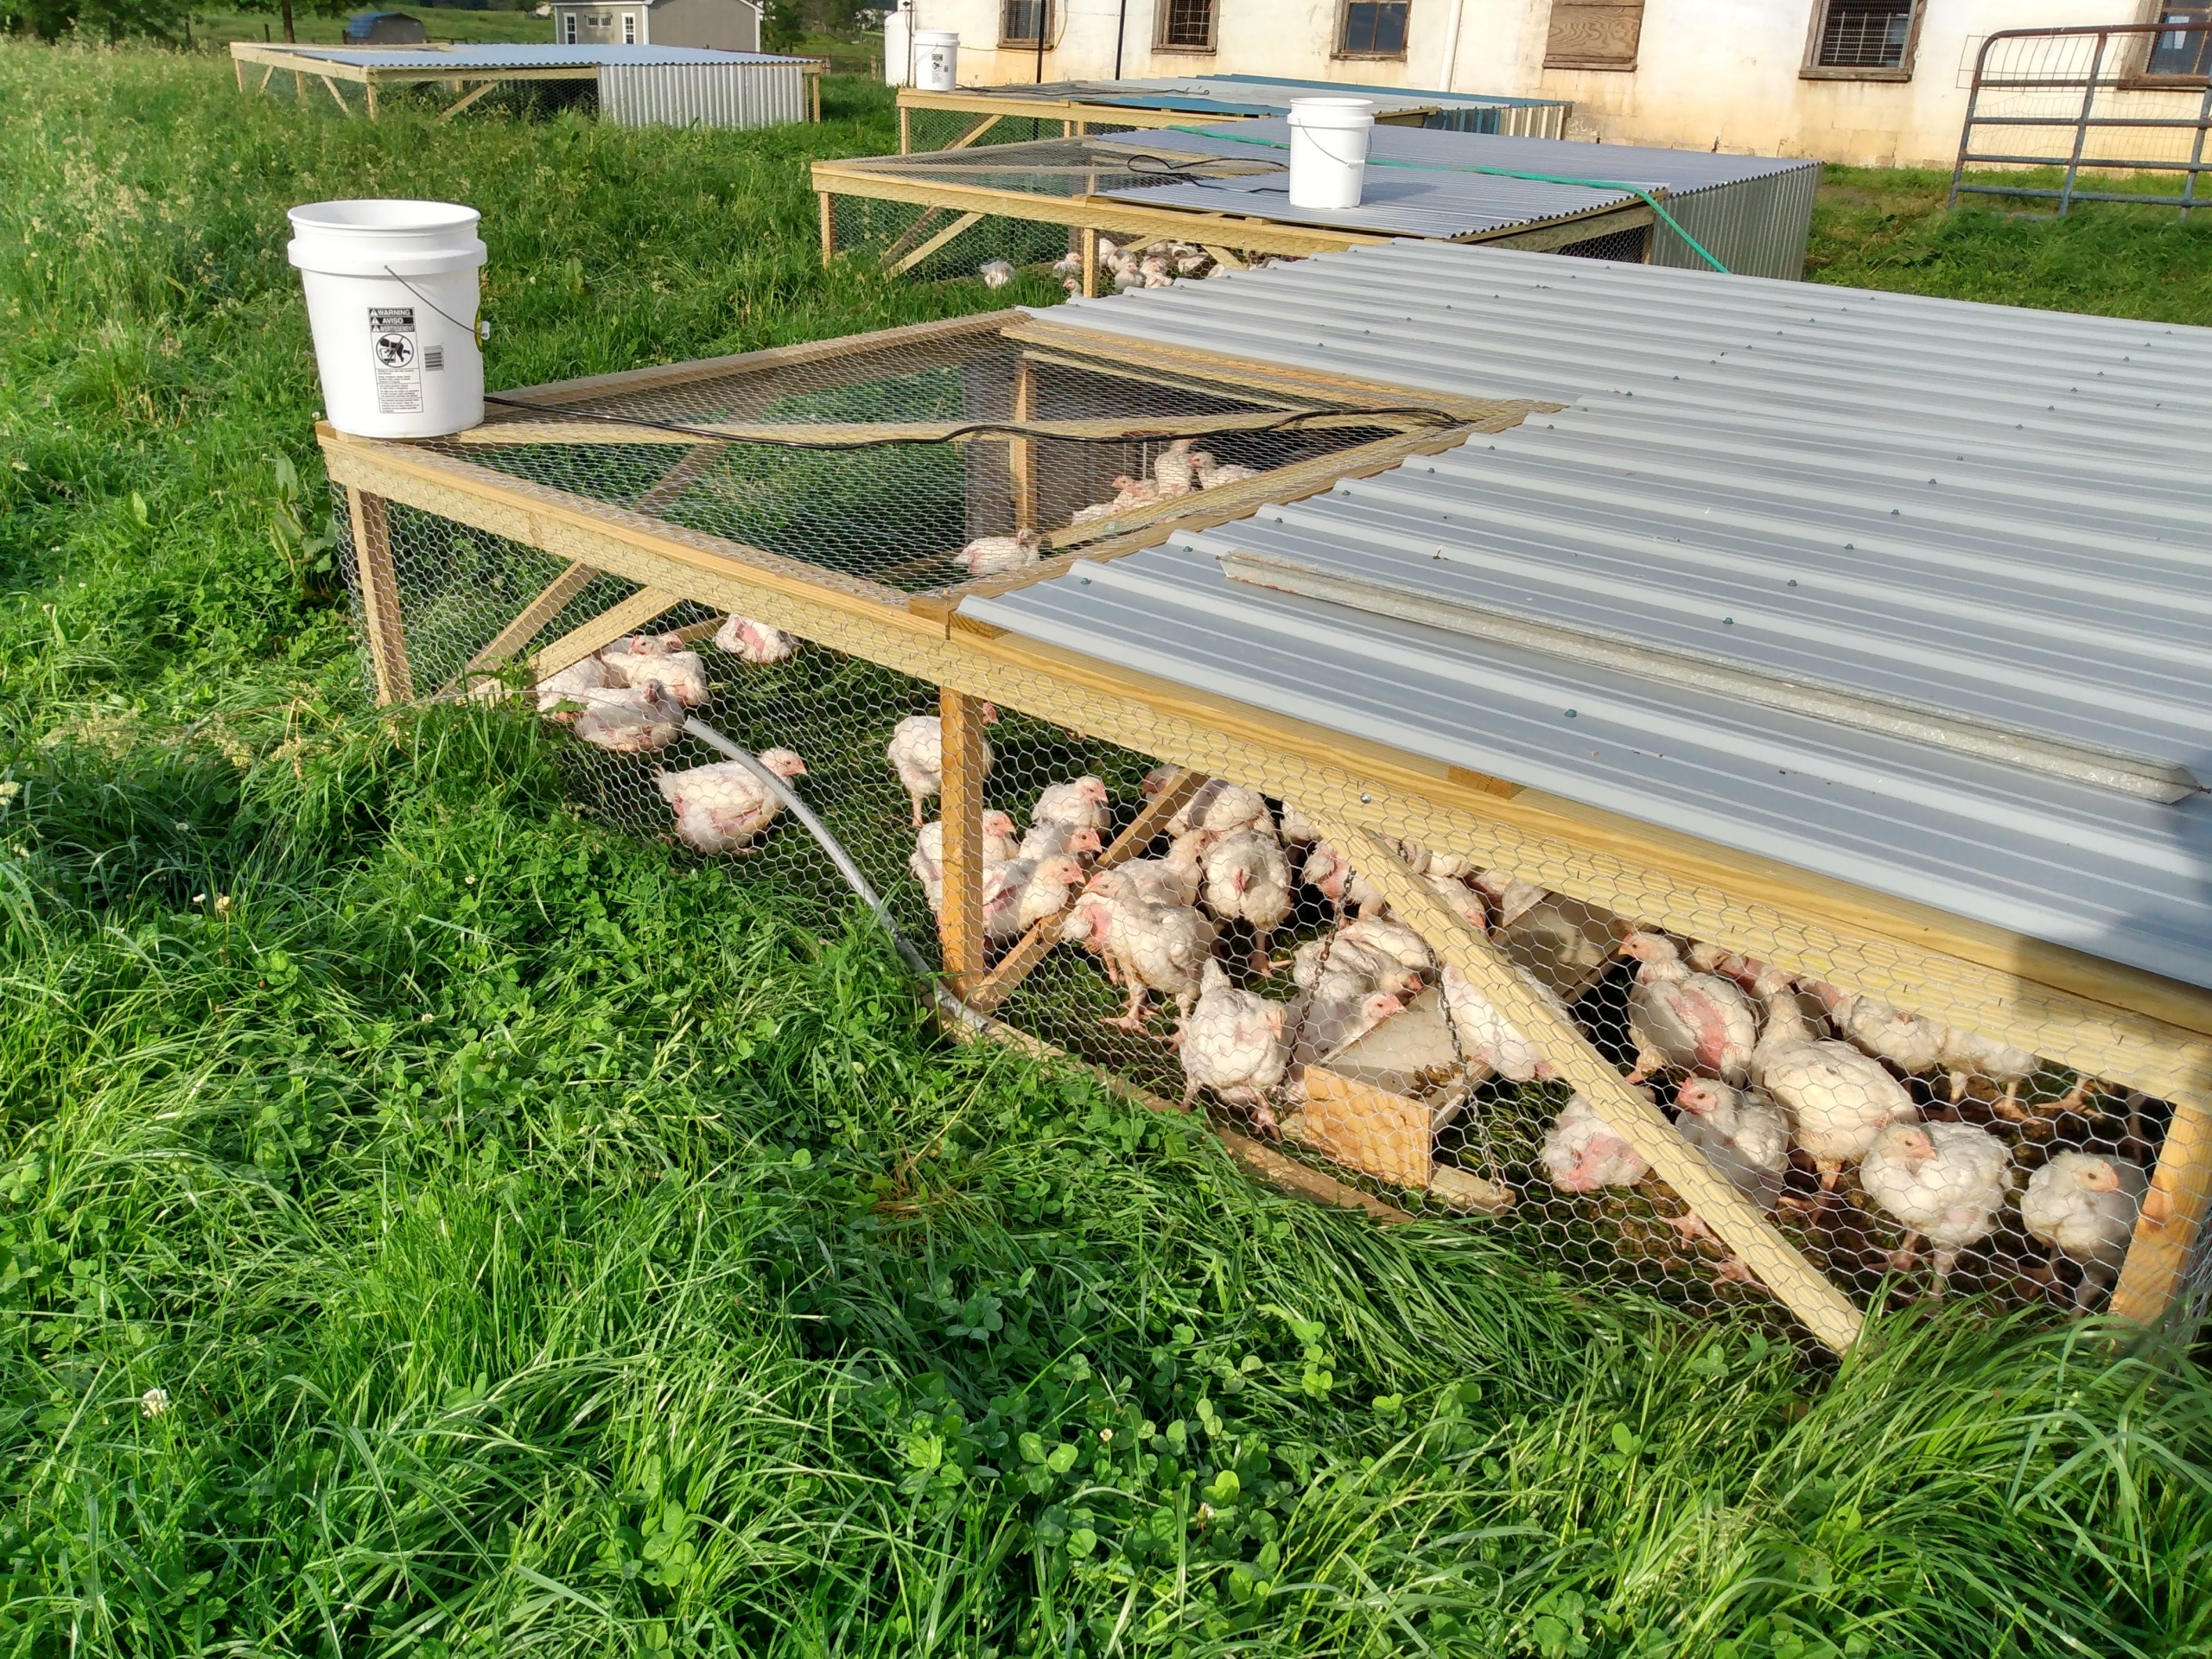 Broiler feed and chickens